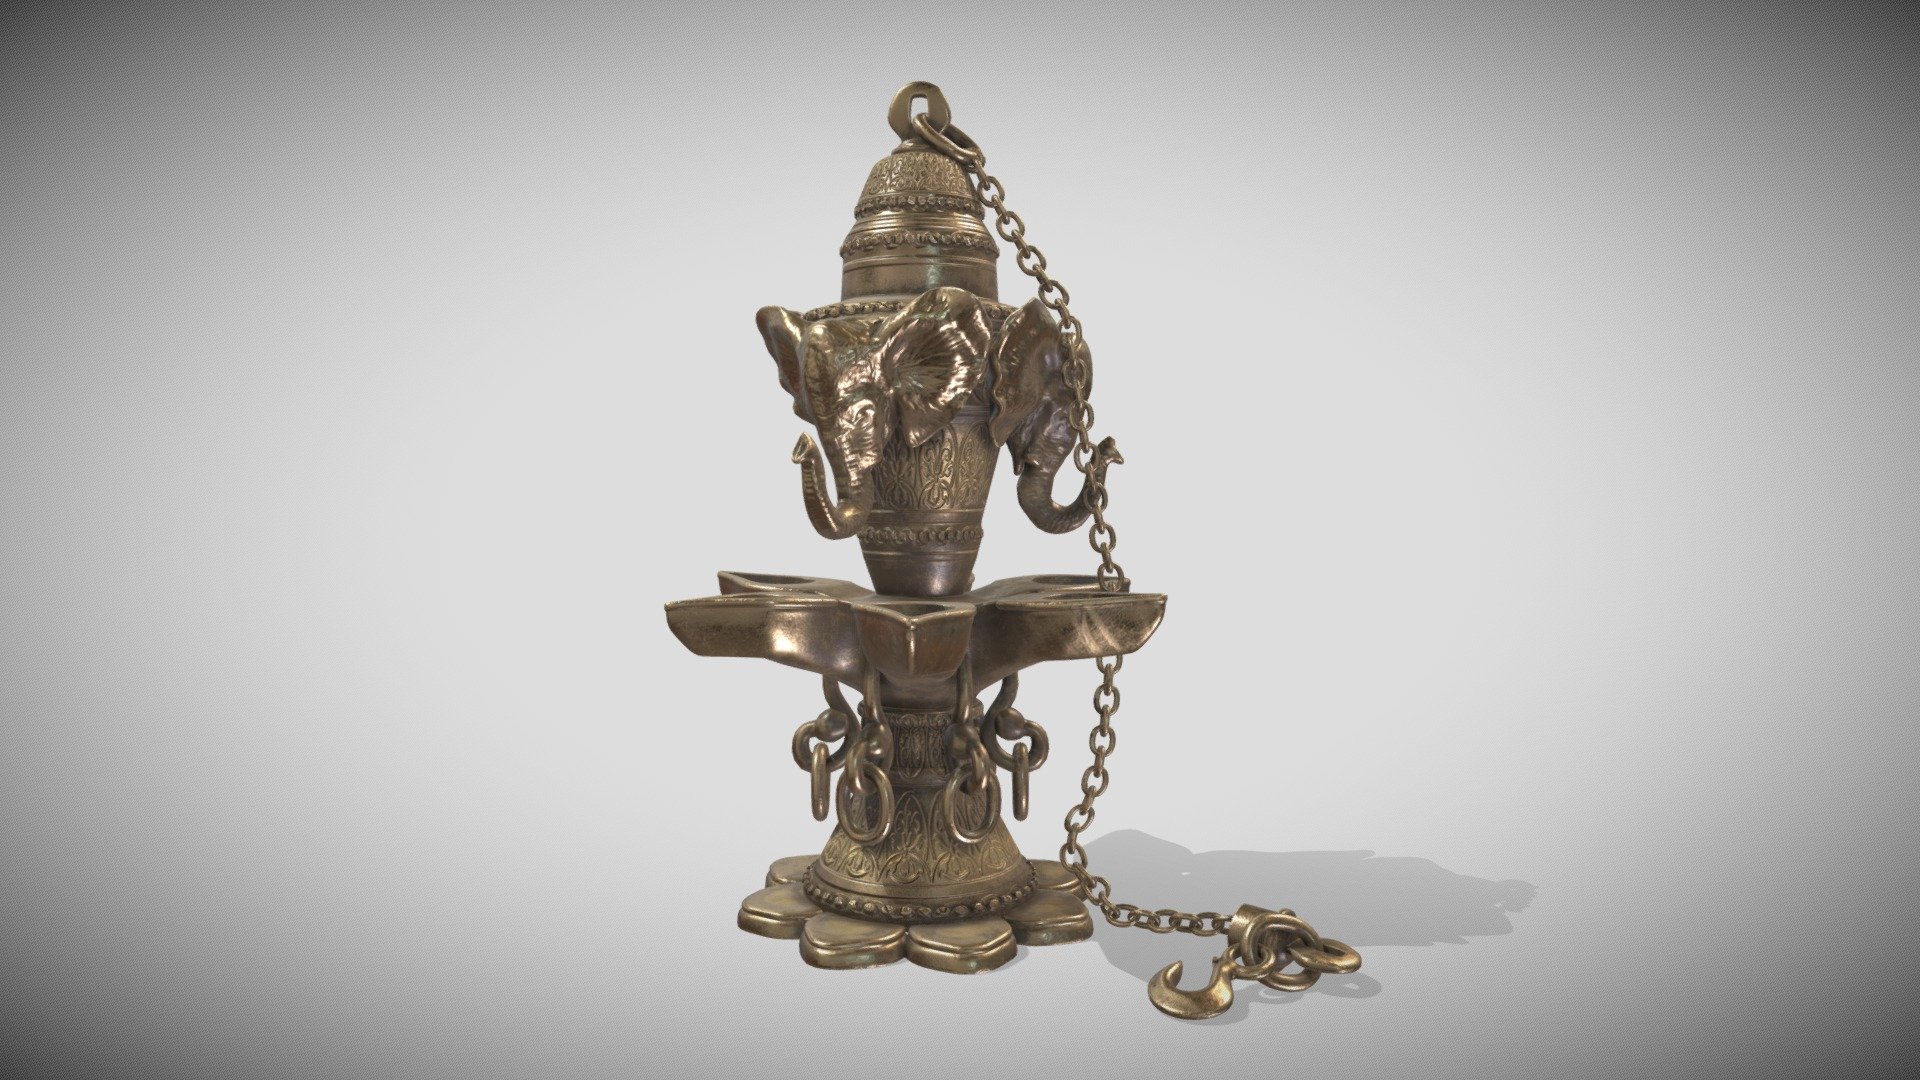 One Material PBR Metalness 4k (png)

Quads - Puja Accessory - Puja_Fire - Buy Royalty Free 3D model by Francesco Coldesina (@topfrank2013) 3d model